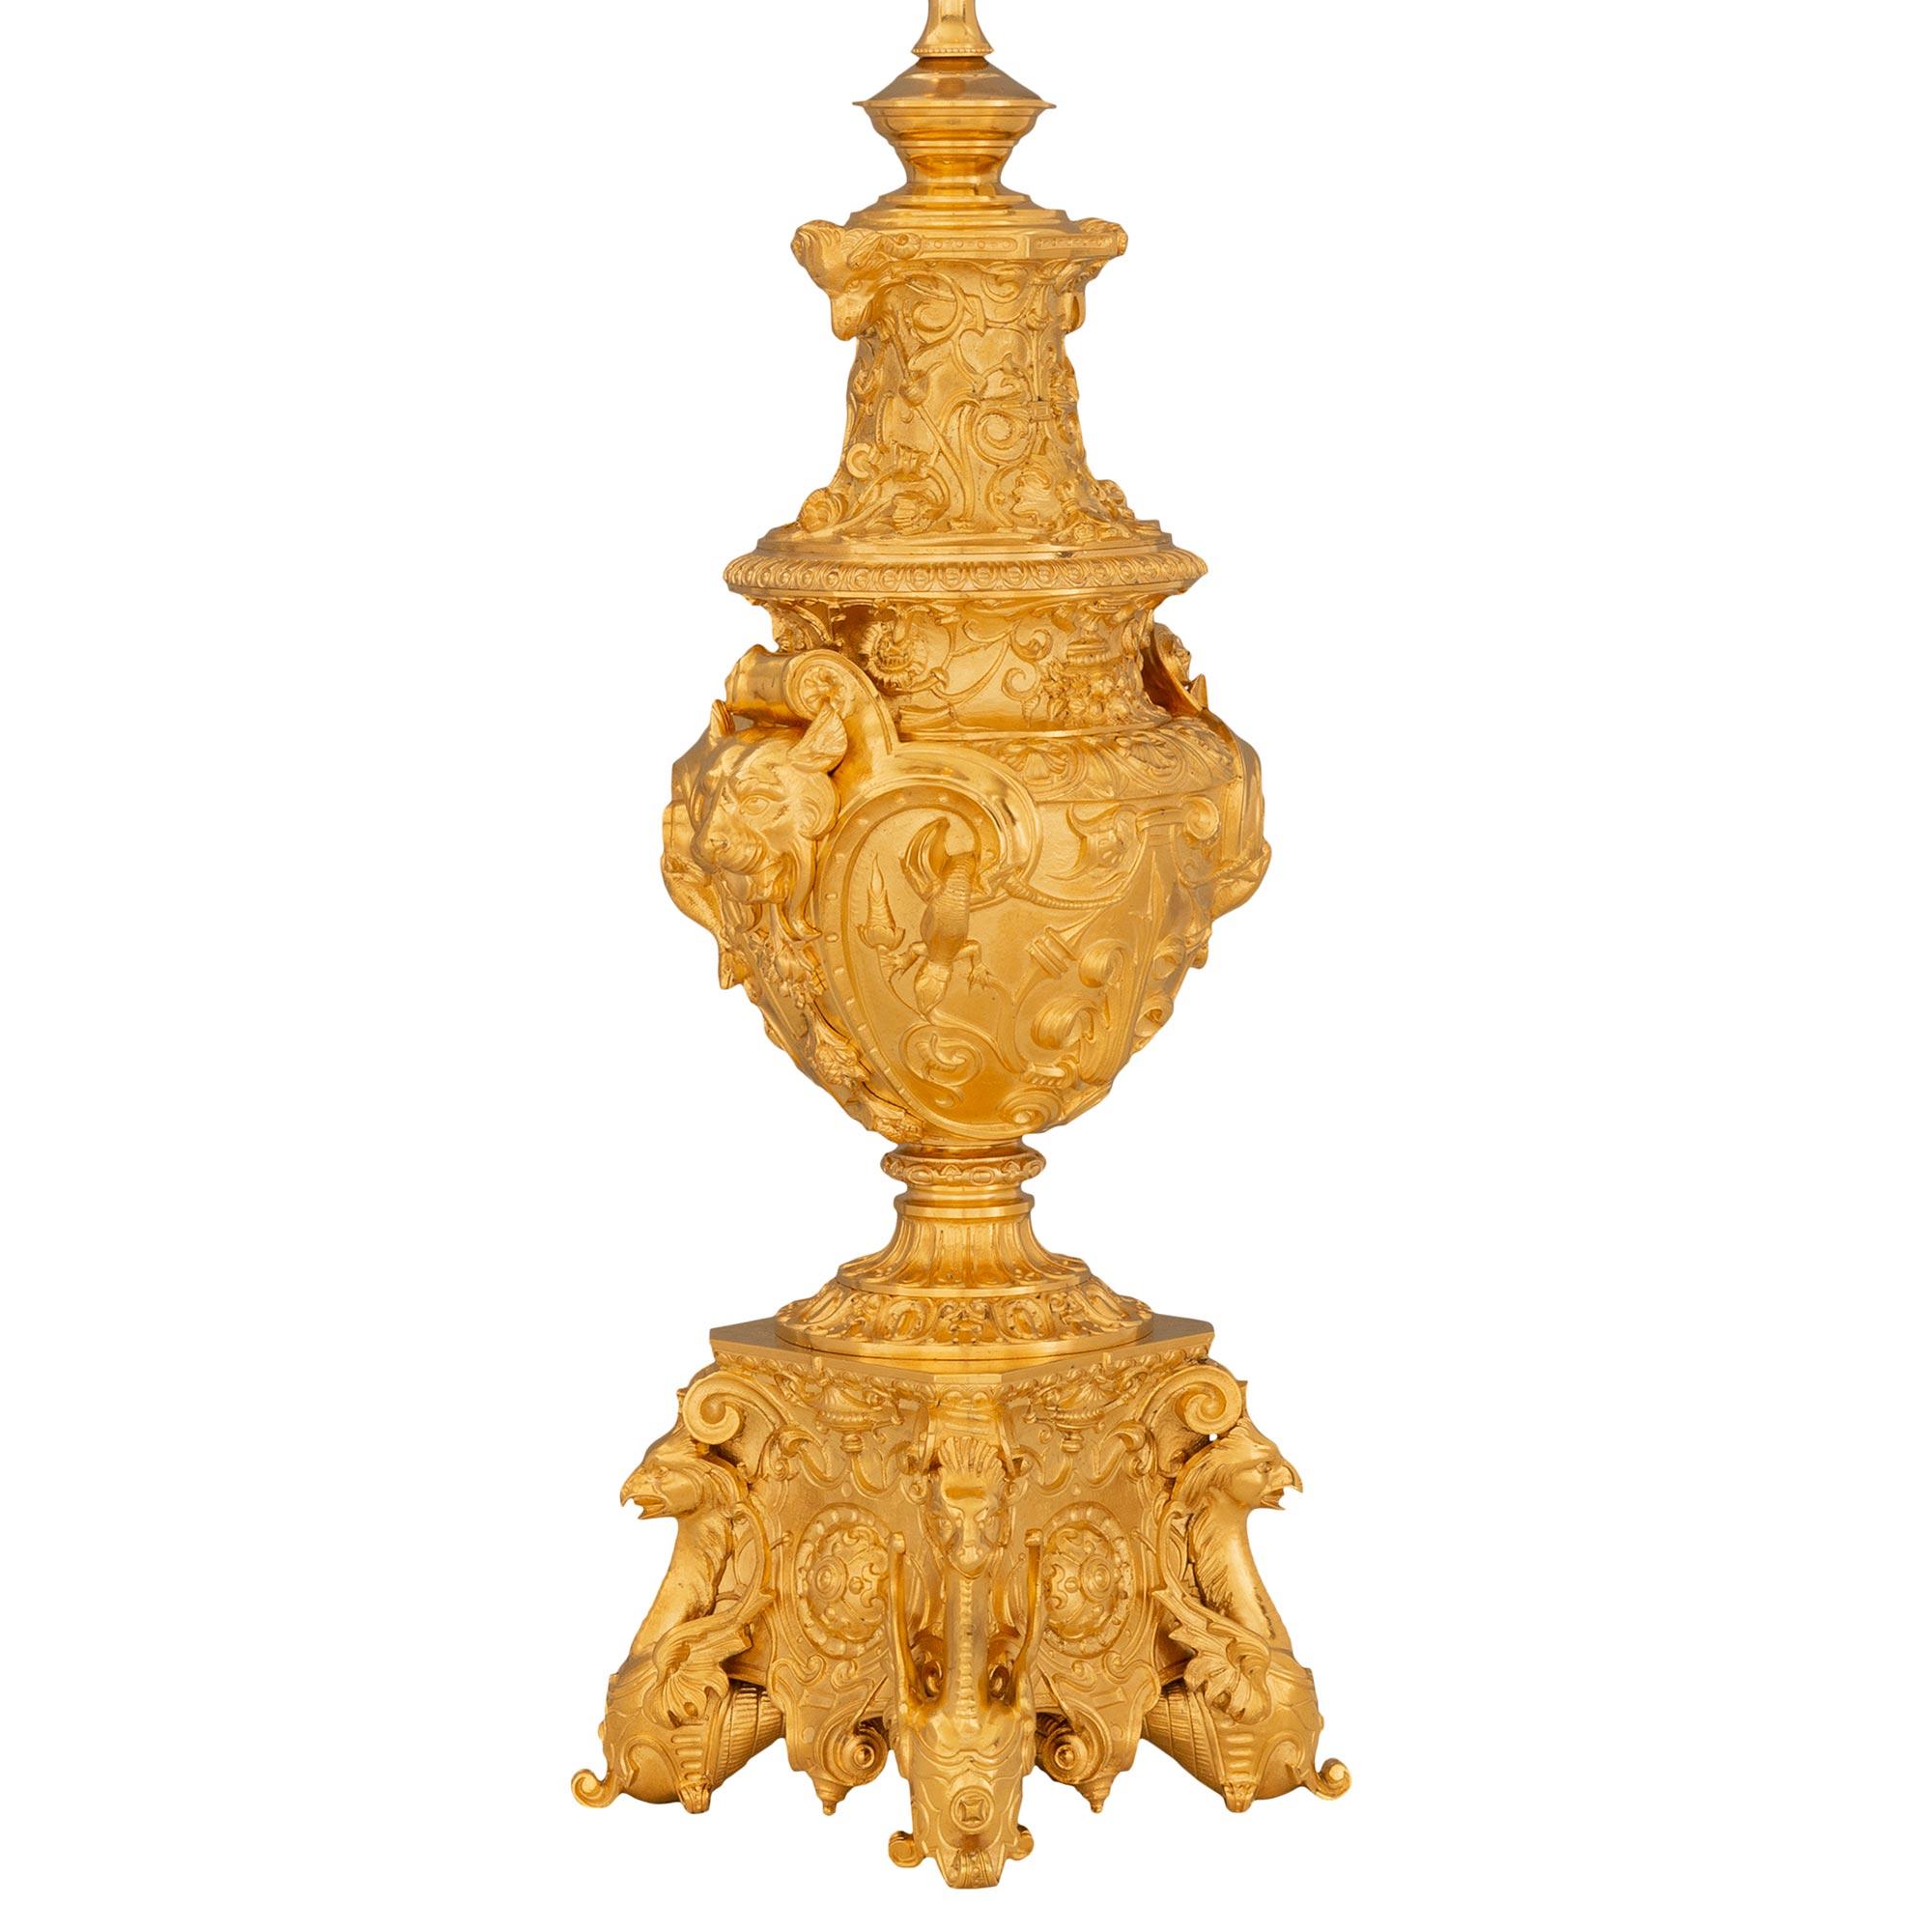 An impressive and very high quality French 19th century Renaissance st. ormolu lamp. The lamp is raised by a striking square base with most unique griffin feet amidst stunning and extremely decorative scrolled foliate designs. At the center, the